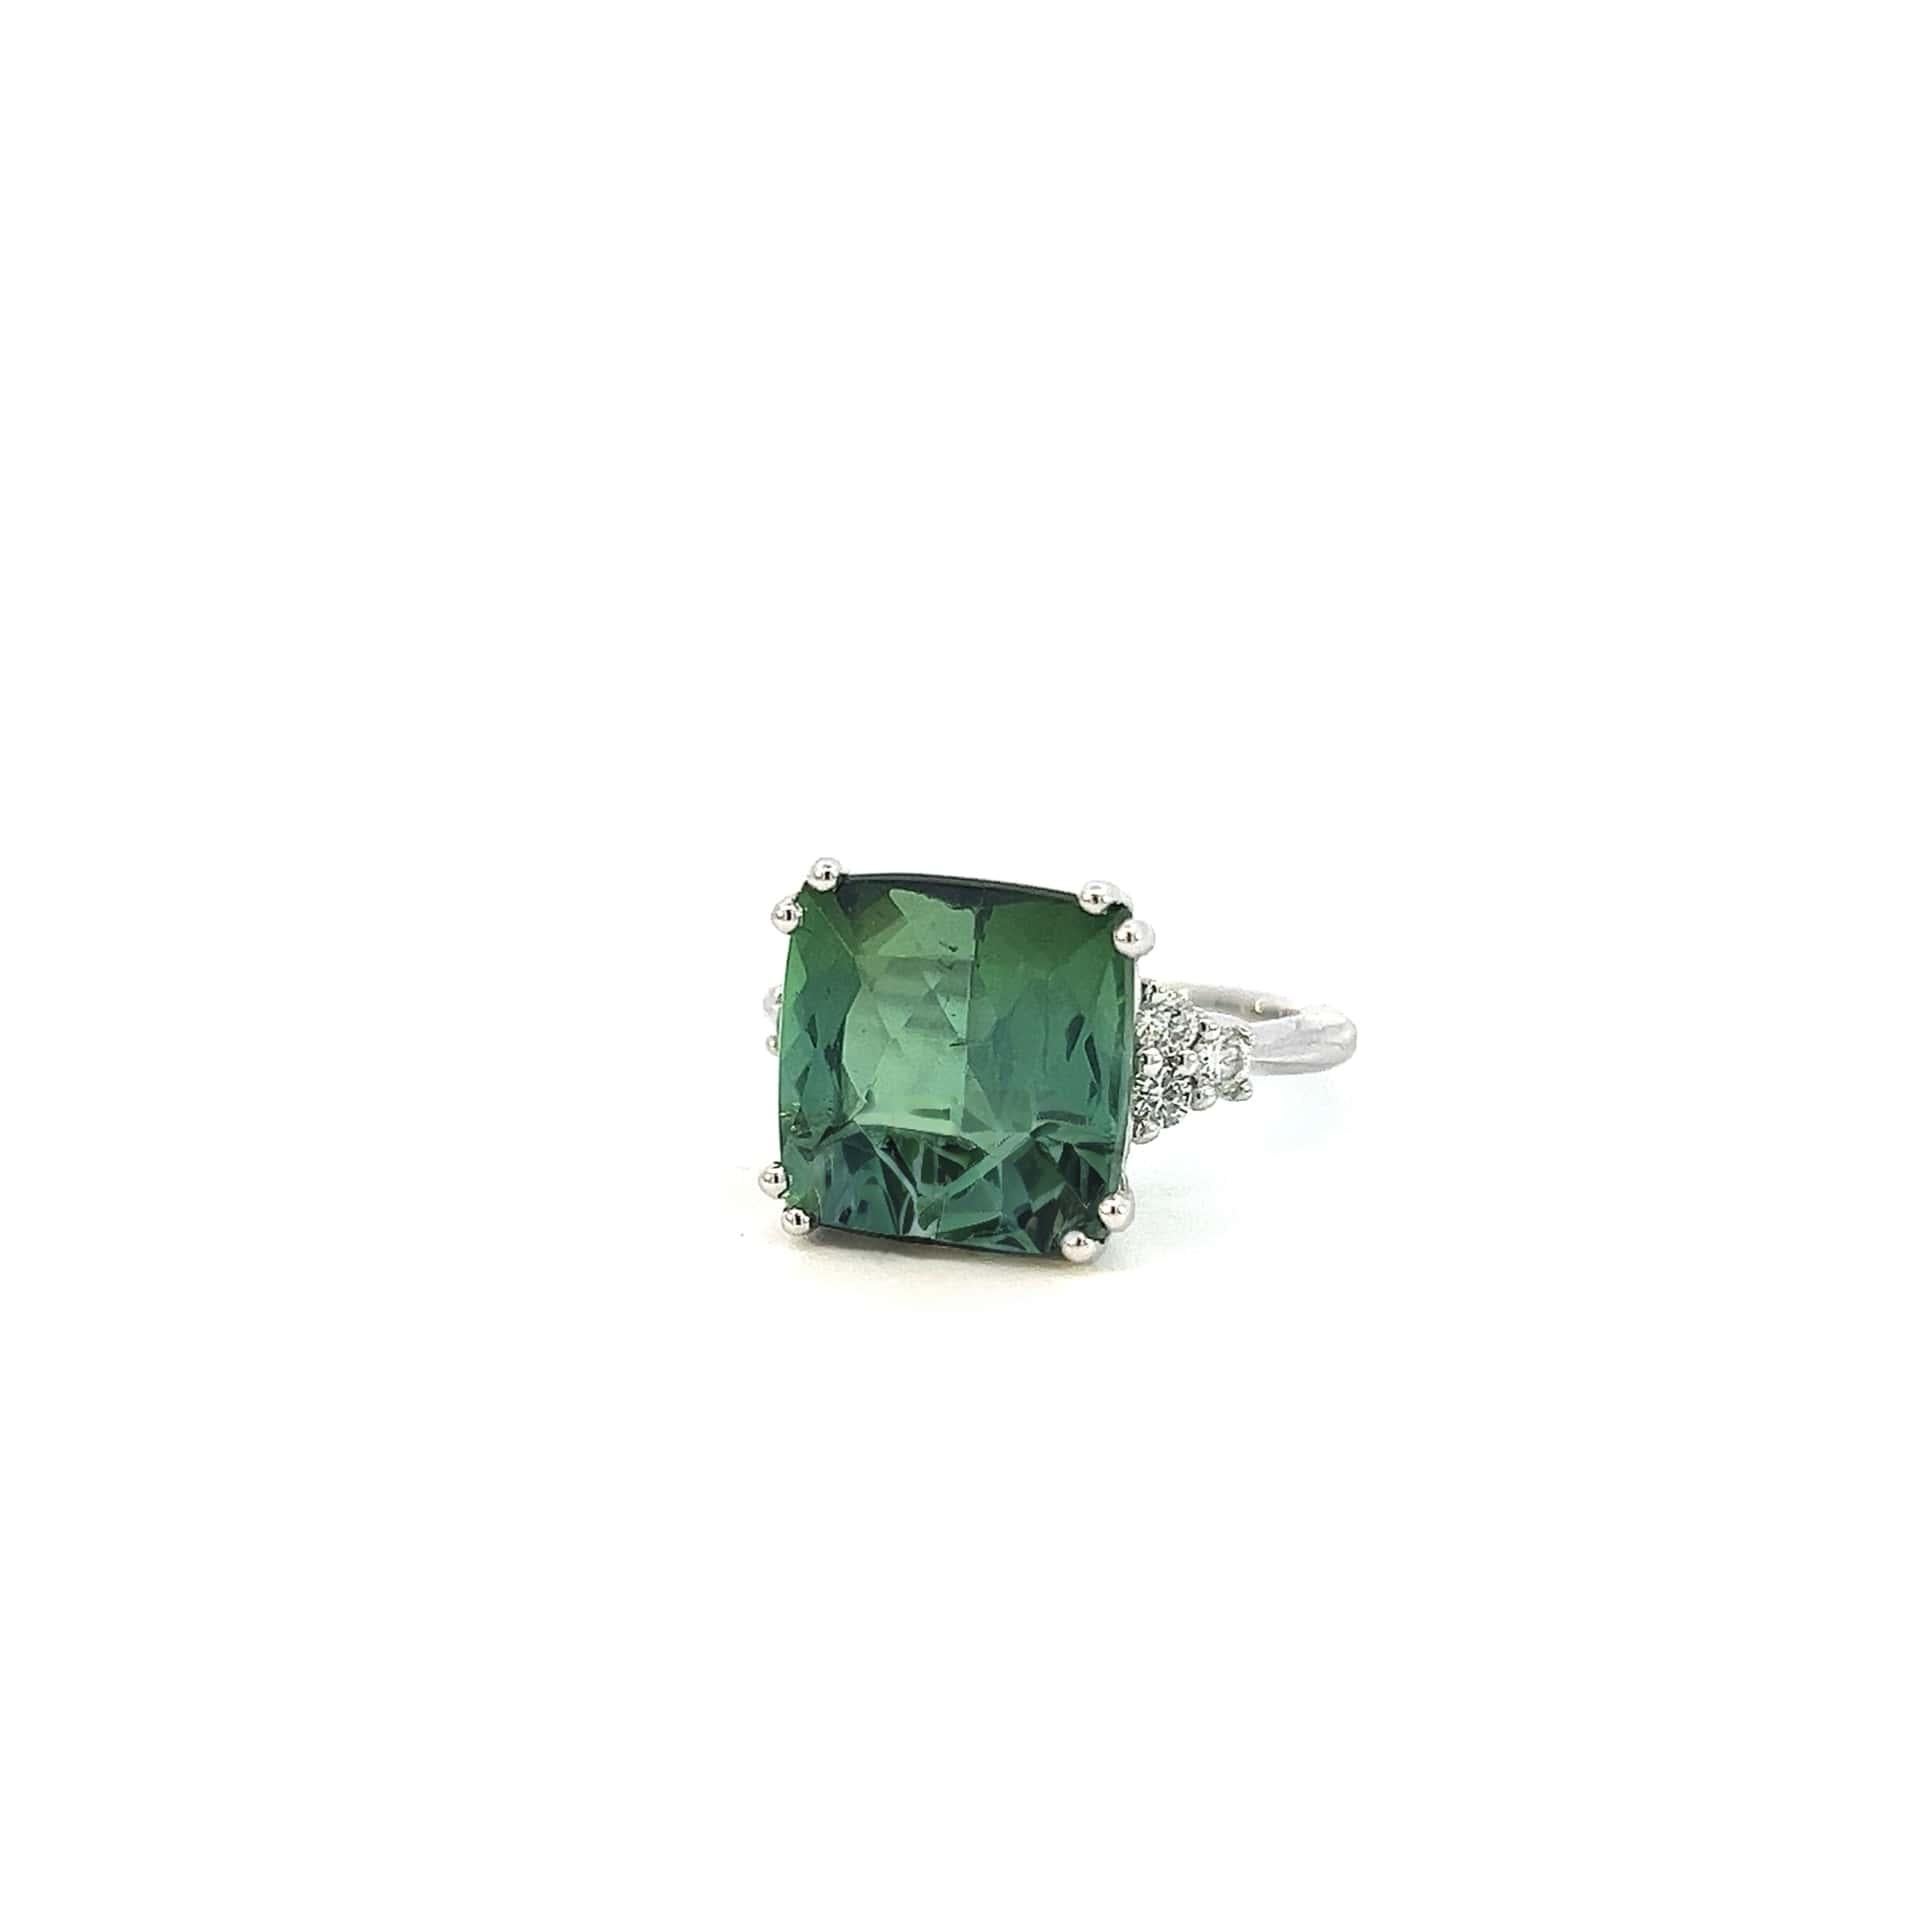 Natural Tourmaline Diamond Ring 7 14k WG 8.27 TCW Certified In Good Condition For Sale In Brooklyn, NY